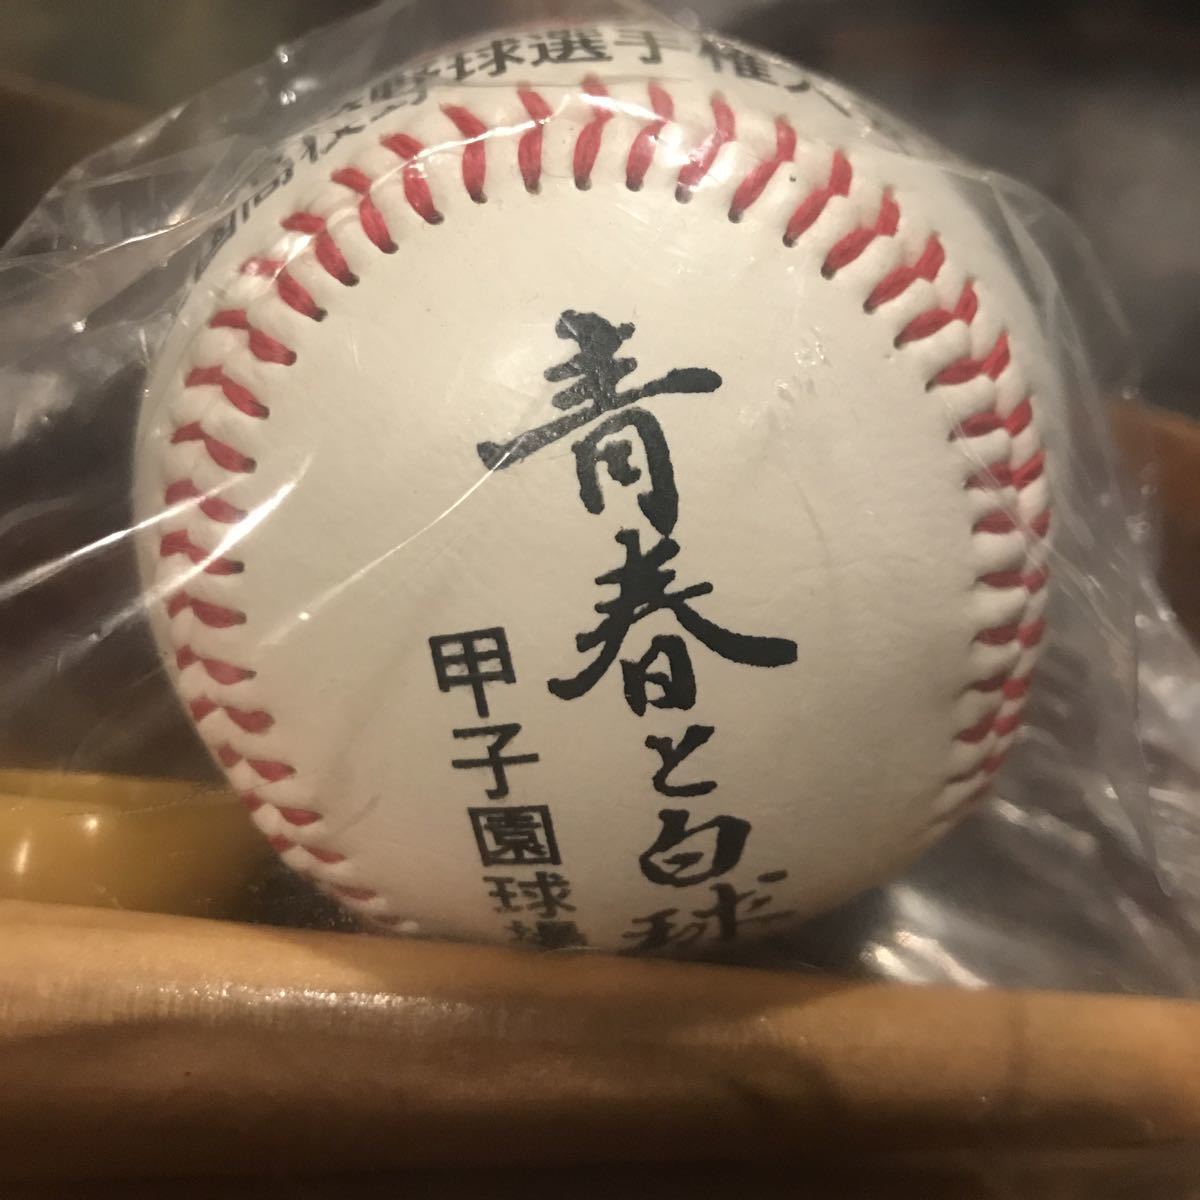  no. 86 times all country high school baseball player right convention Koshien lamp place youth . white lamp ball ornament. bat new goods unused 